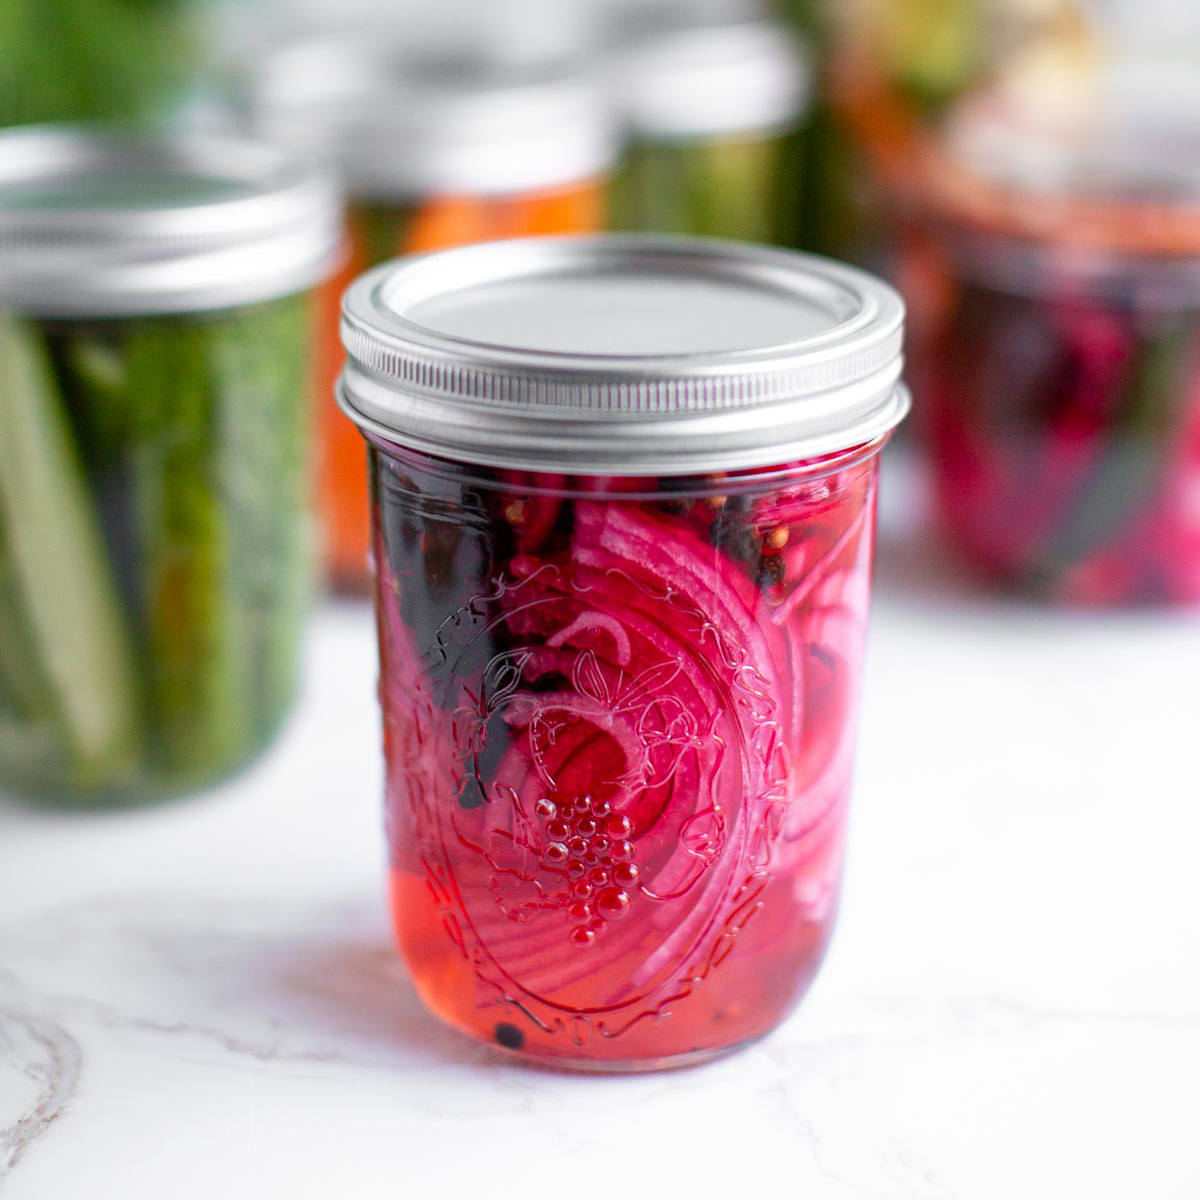 Pink pickled red onion in a glass jar with a lid.